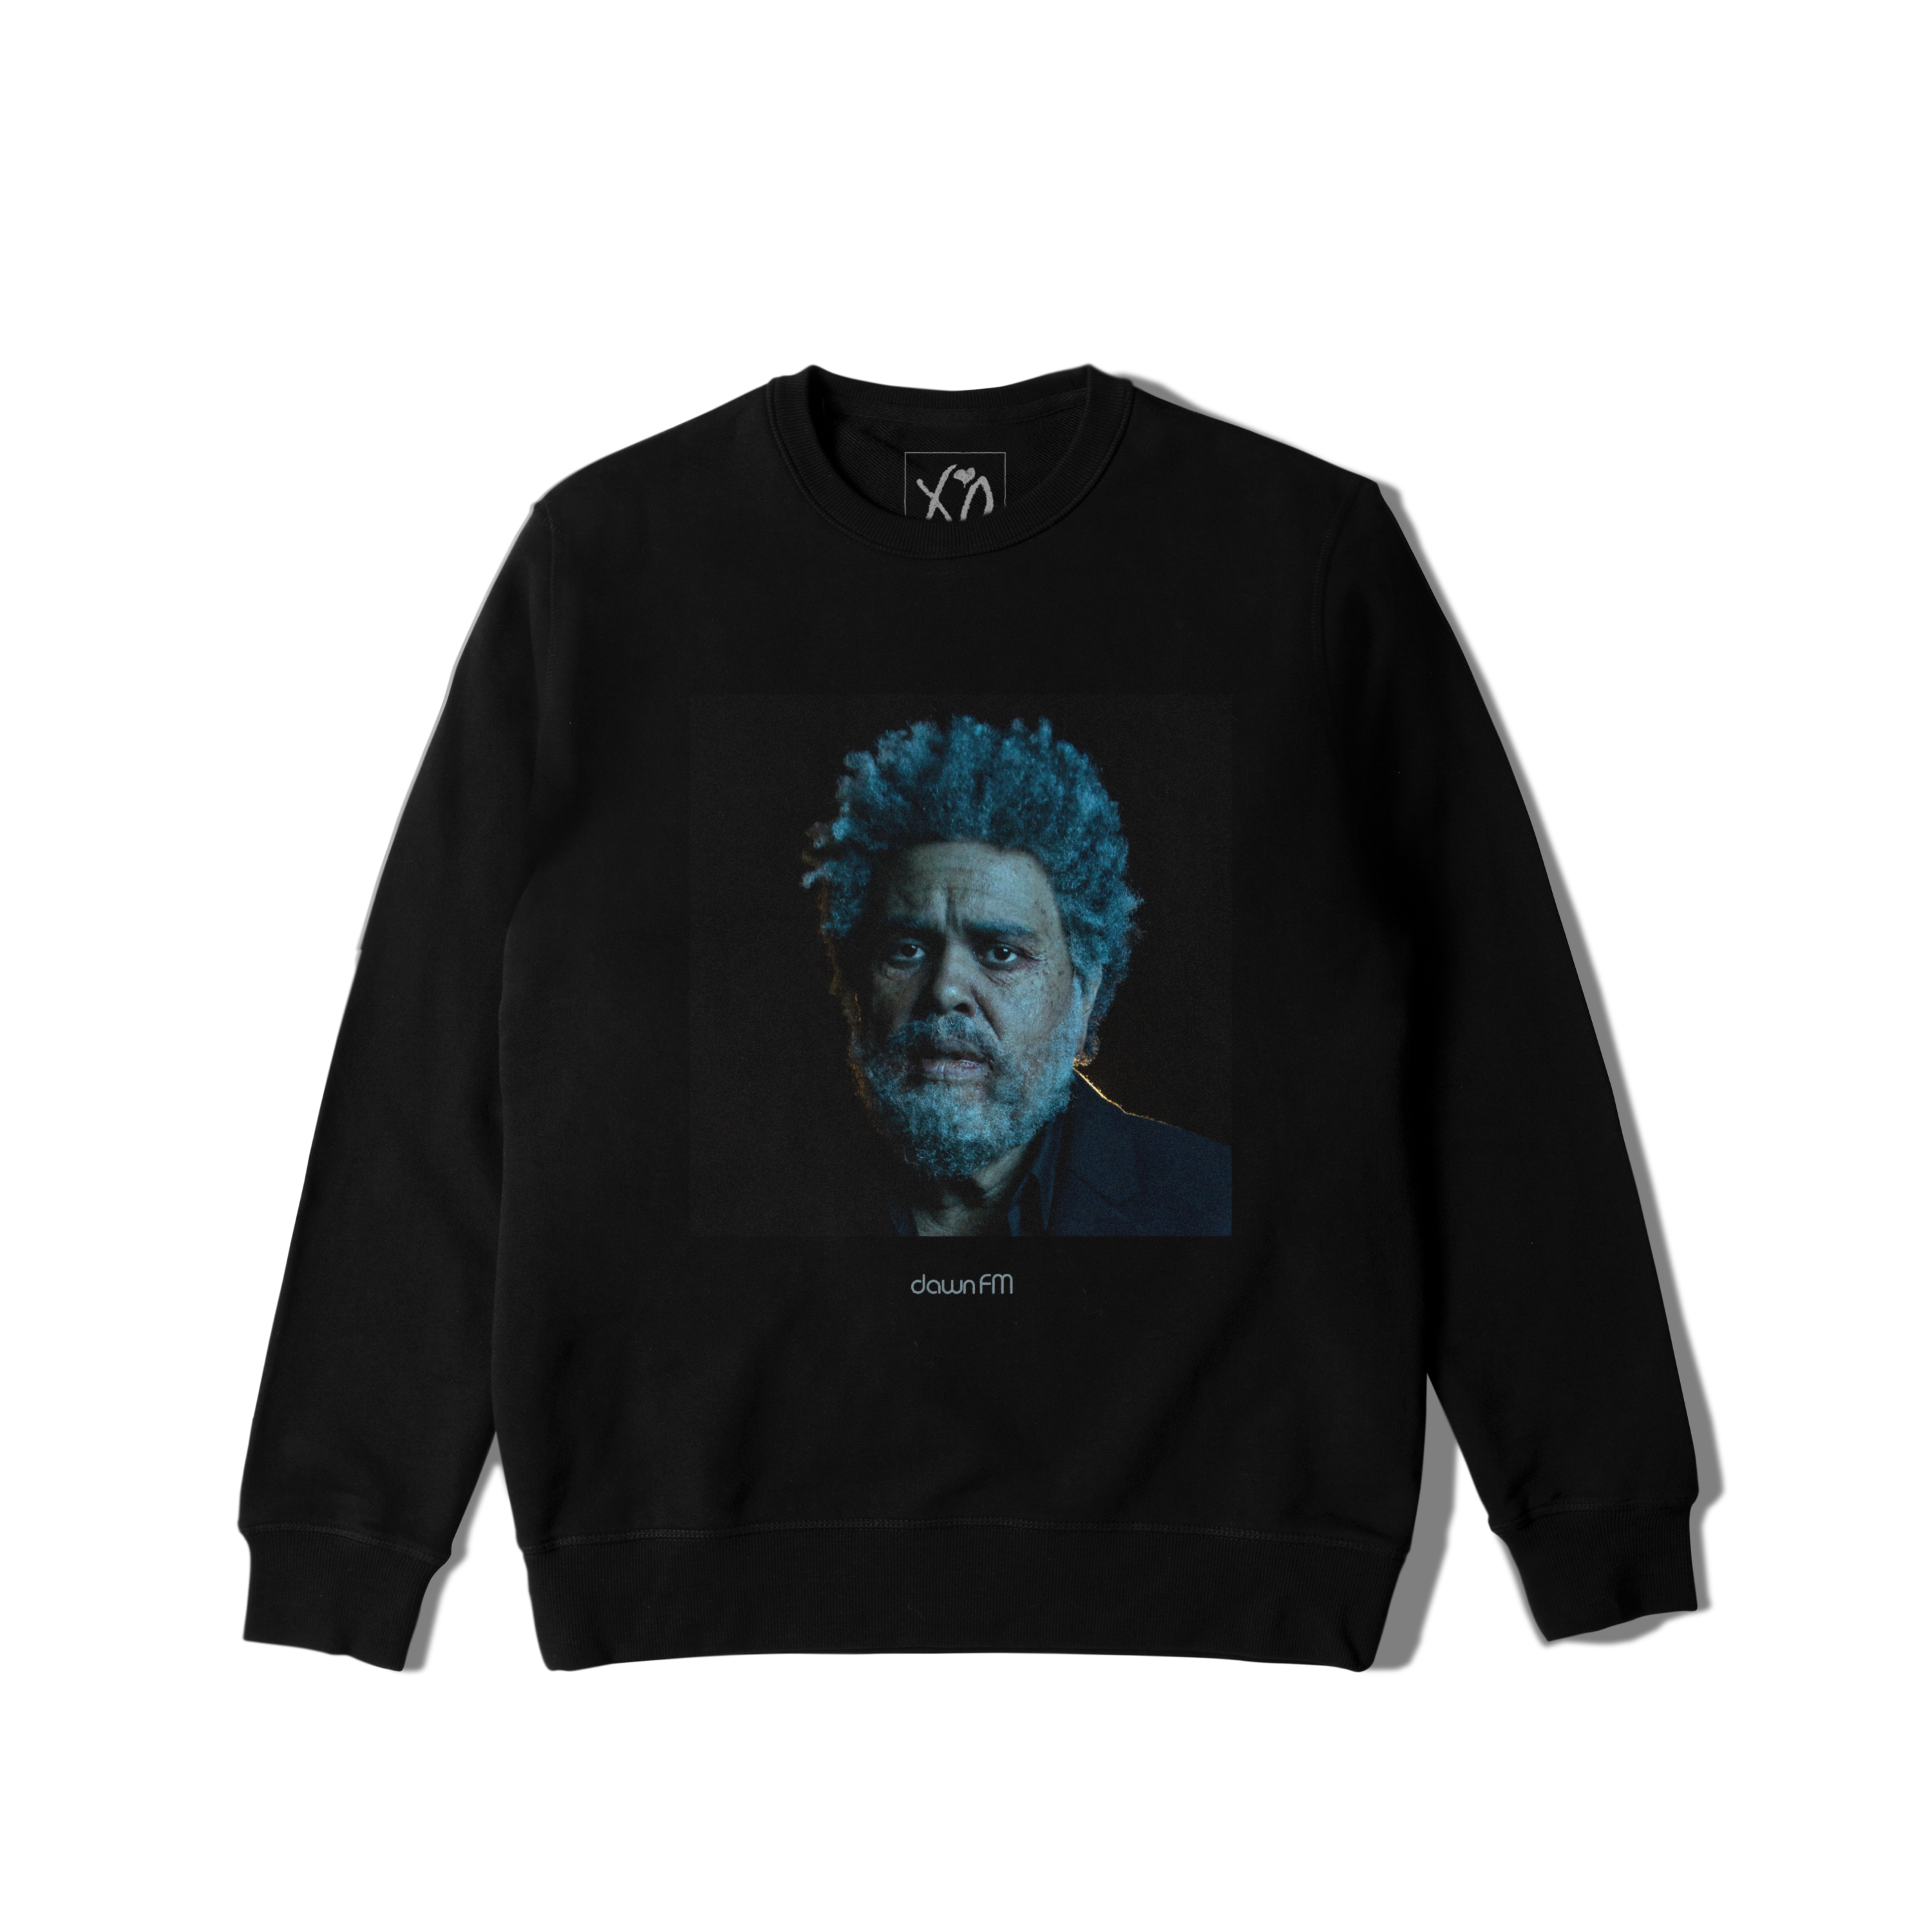 Best Selling Shopify Products on shop.theweeknd.com-4